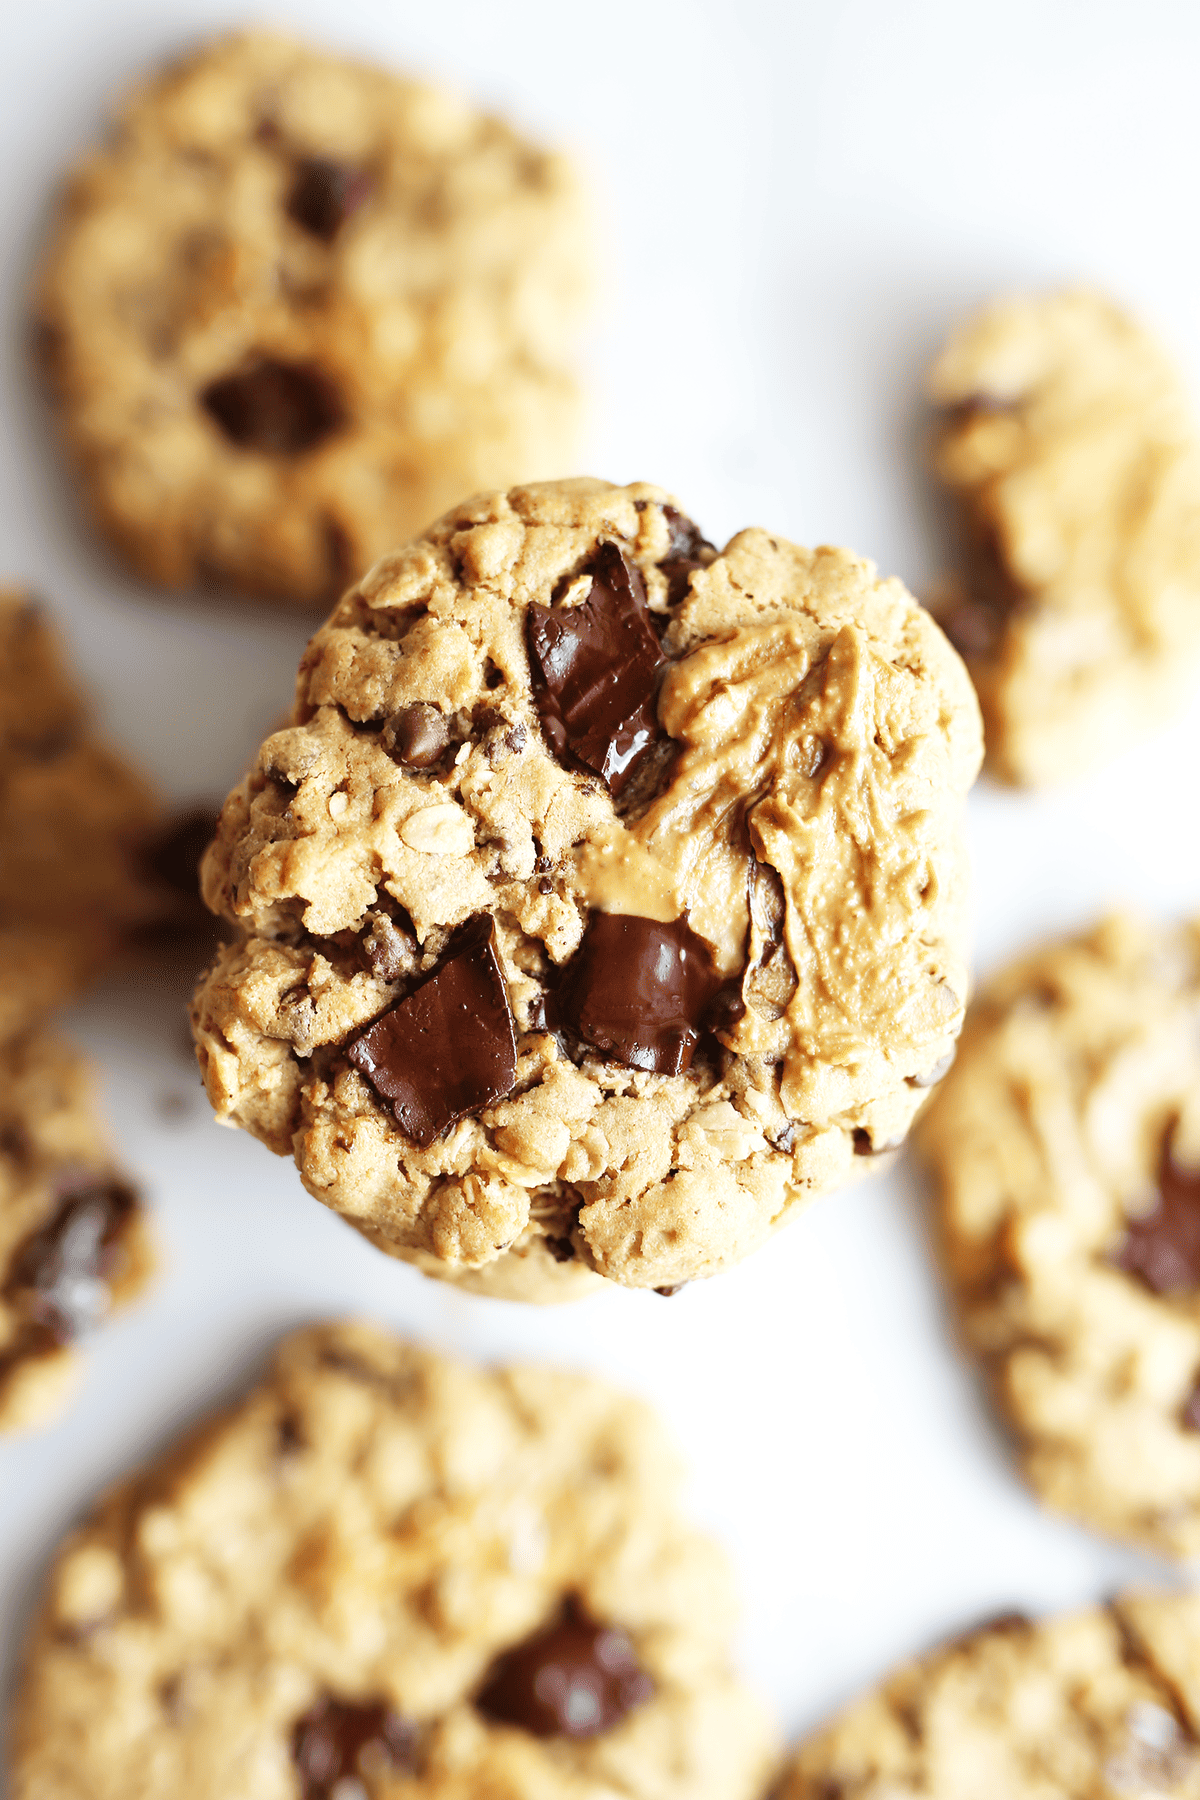 This easy homemade vegan Chocolate Chunk Peanut Butter Oat Cookie tastes like a granola bar meets peanut butter cup in the form of a delicious cookie!